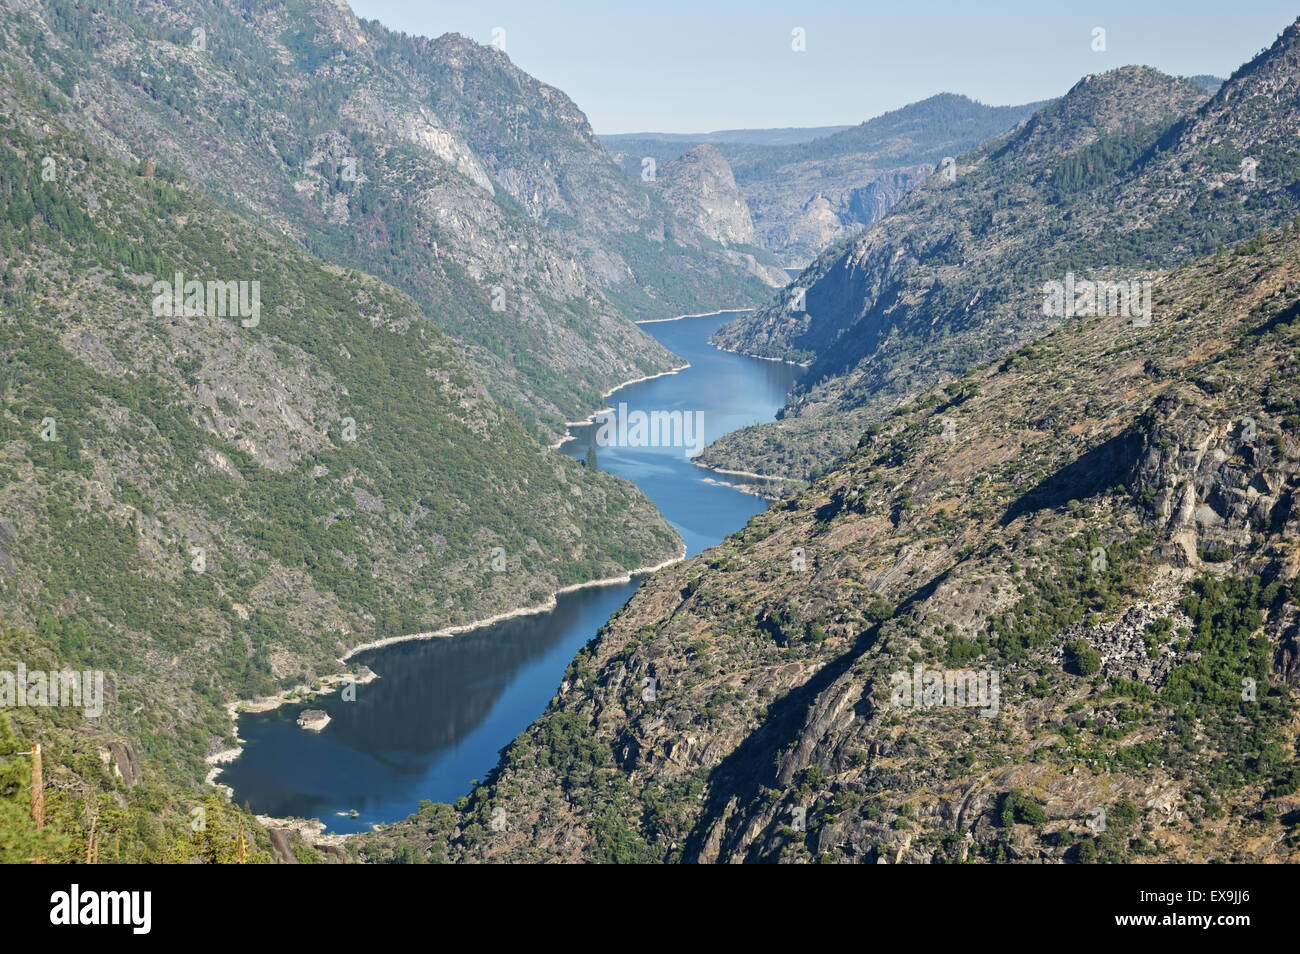 Hetch Hetchy Reservoir from the Grand Canyon of the Tuolumne River in Yosemite National Park Stock Photo